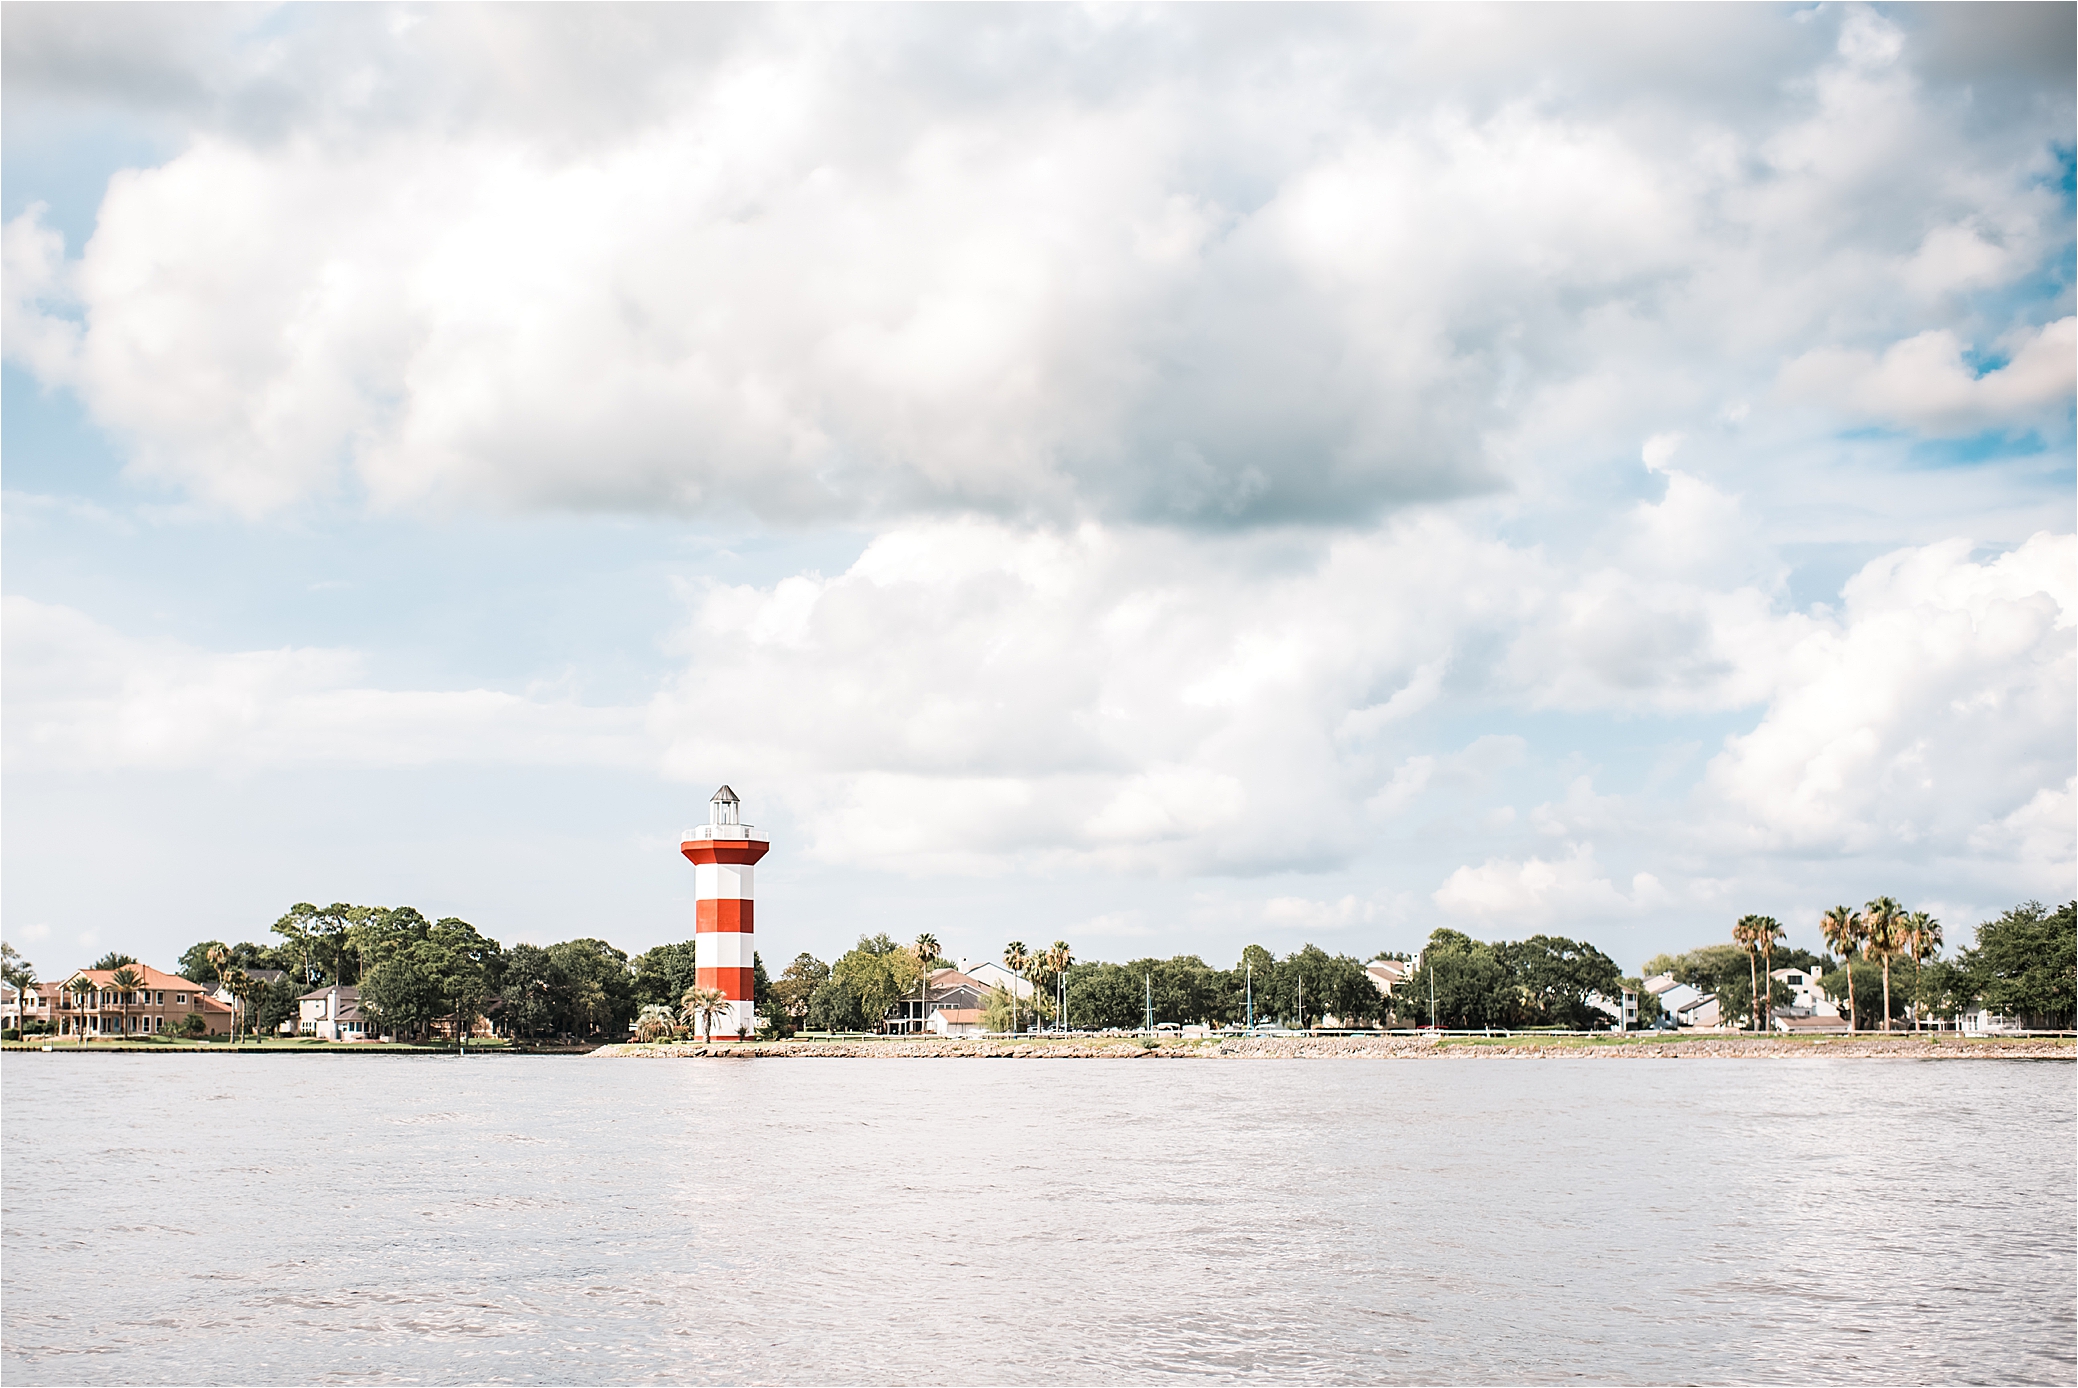 The Lake Conroe Lighthouse, red and white lighthouse